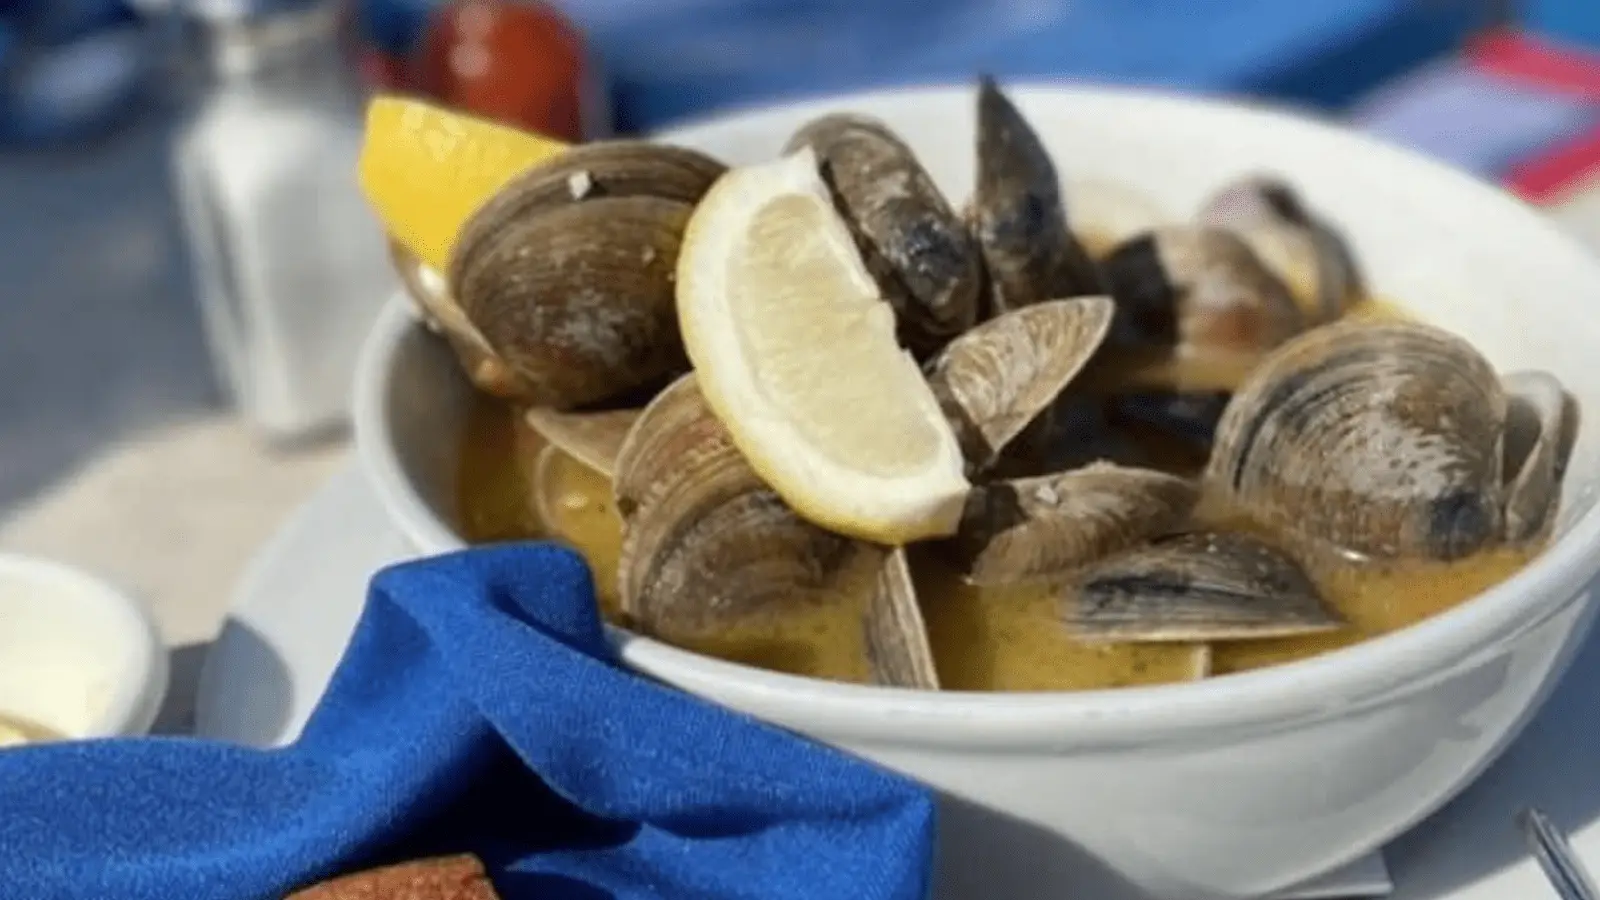 A white bowl filled with steamed clams in a broth is garnished with lemon wedges. Resting on a blue napkin with a salt shaker blurred in the background, it epitomizes the best lunch experience on the Monterey Peninsula, enhanced by an inviting outdoor setting.